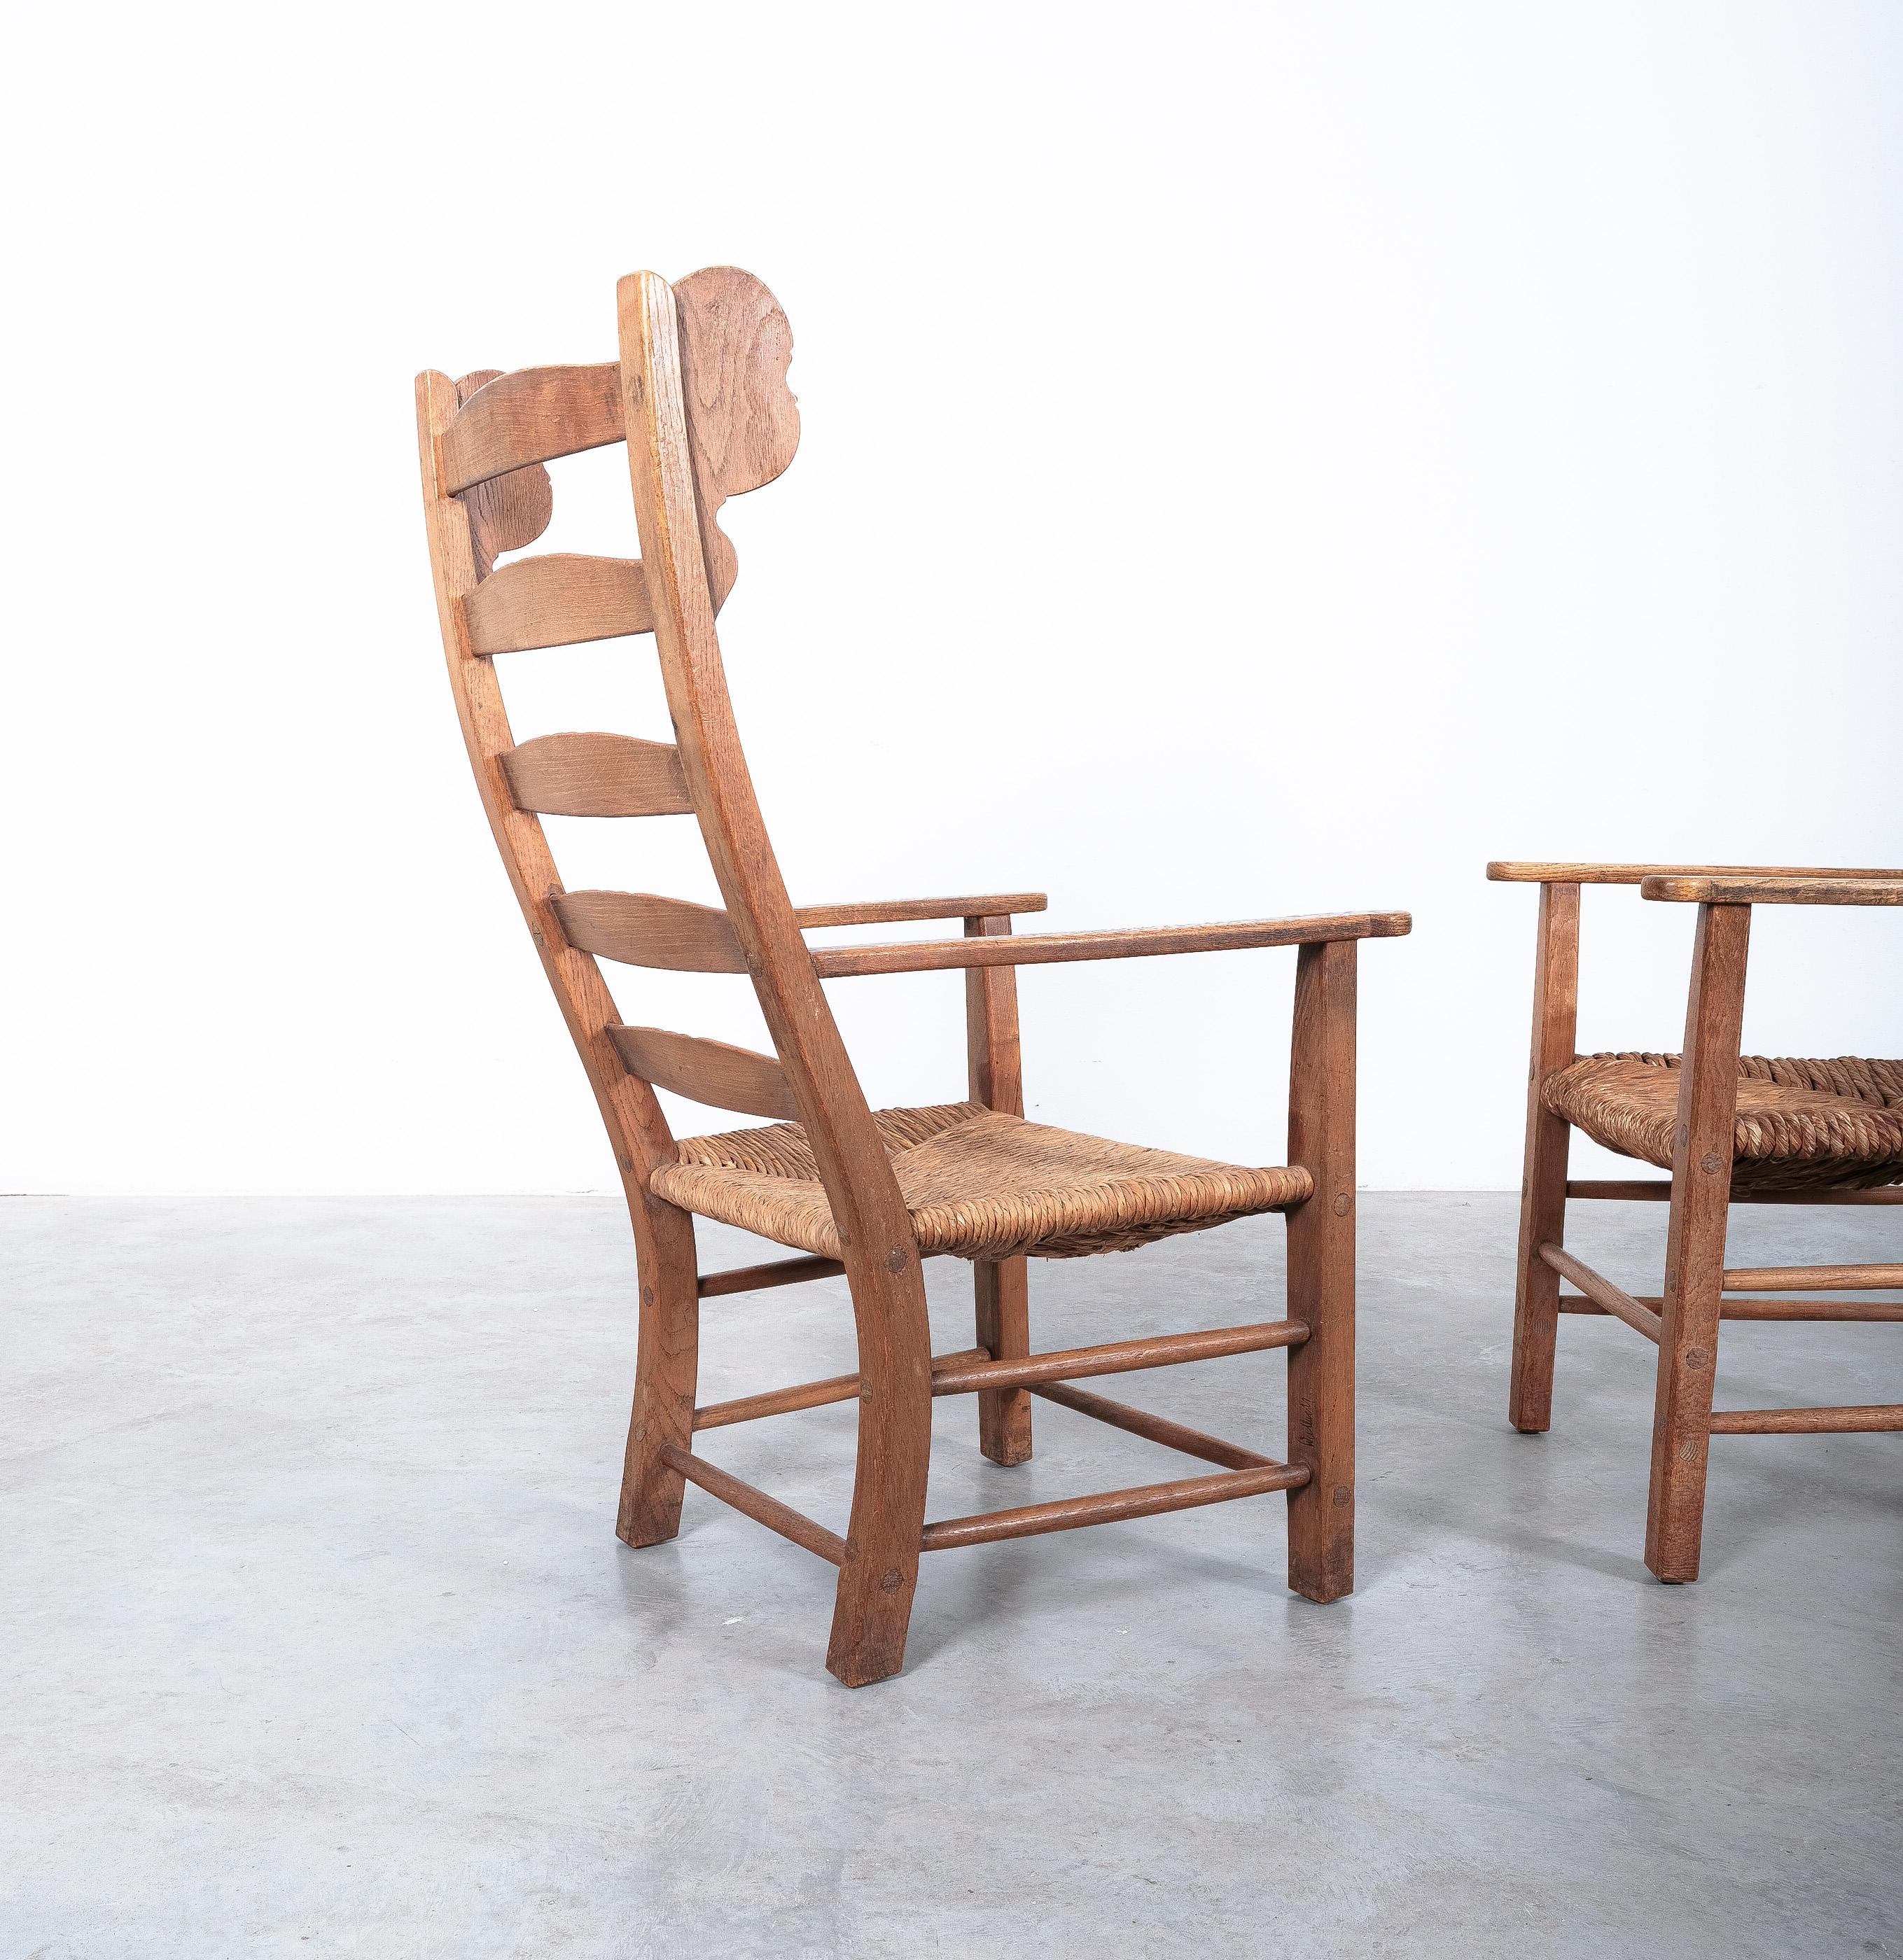 French Pair of Rustic Rope Lounge Chairs Beech Wood, France, 1950 For Sale